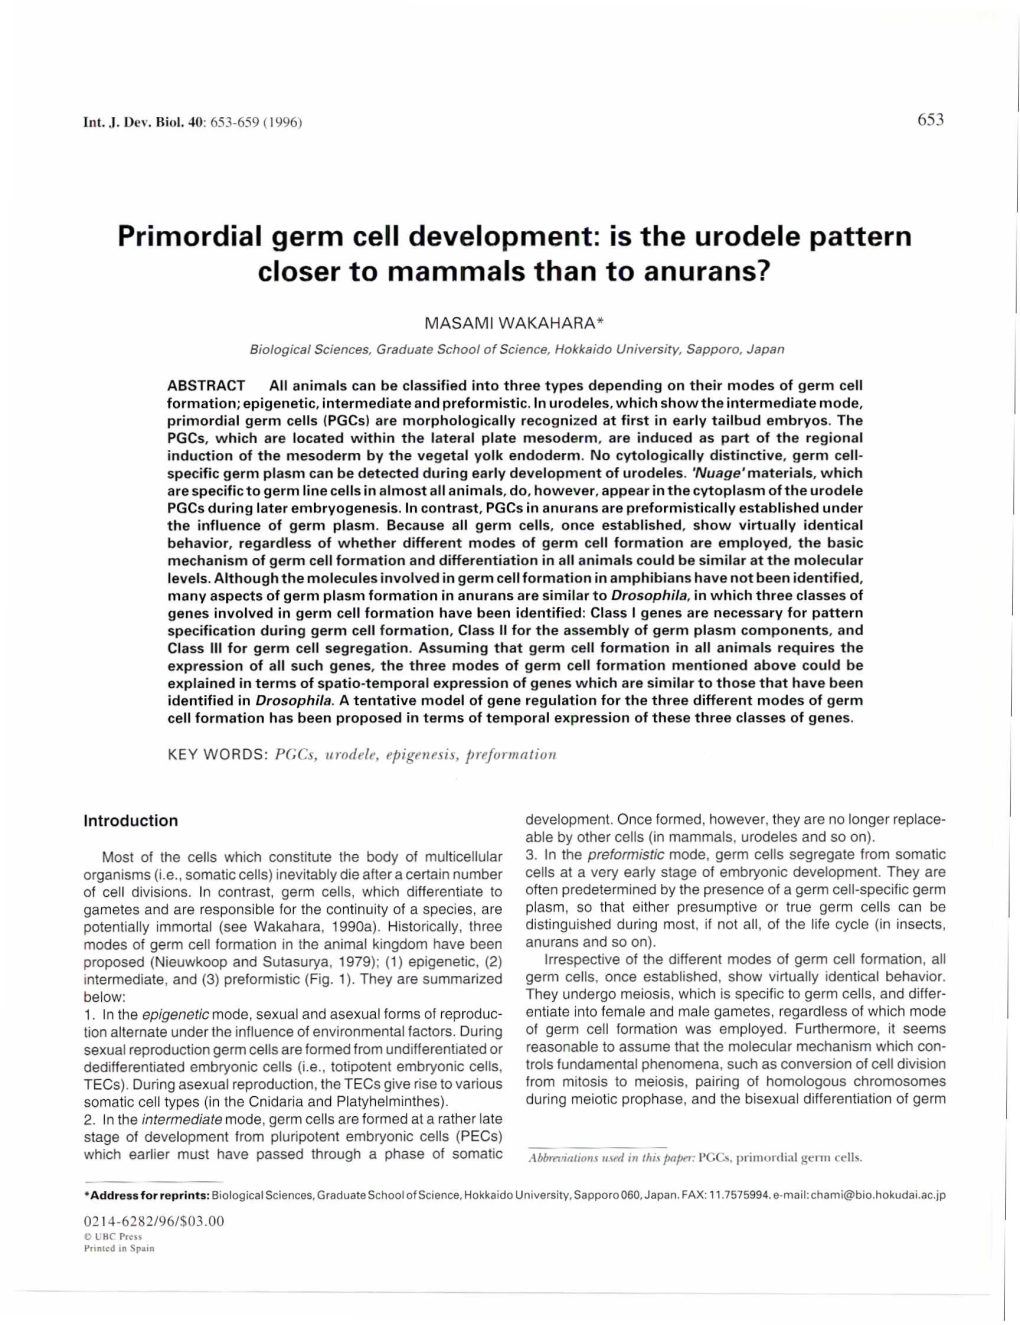 Primordial Germ Cell Development: Is the Urodele Pattern Closer to Mammals Than to Anurans?